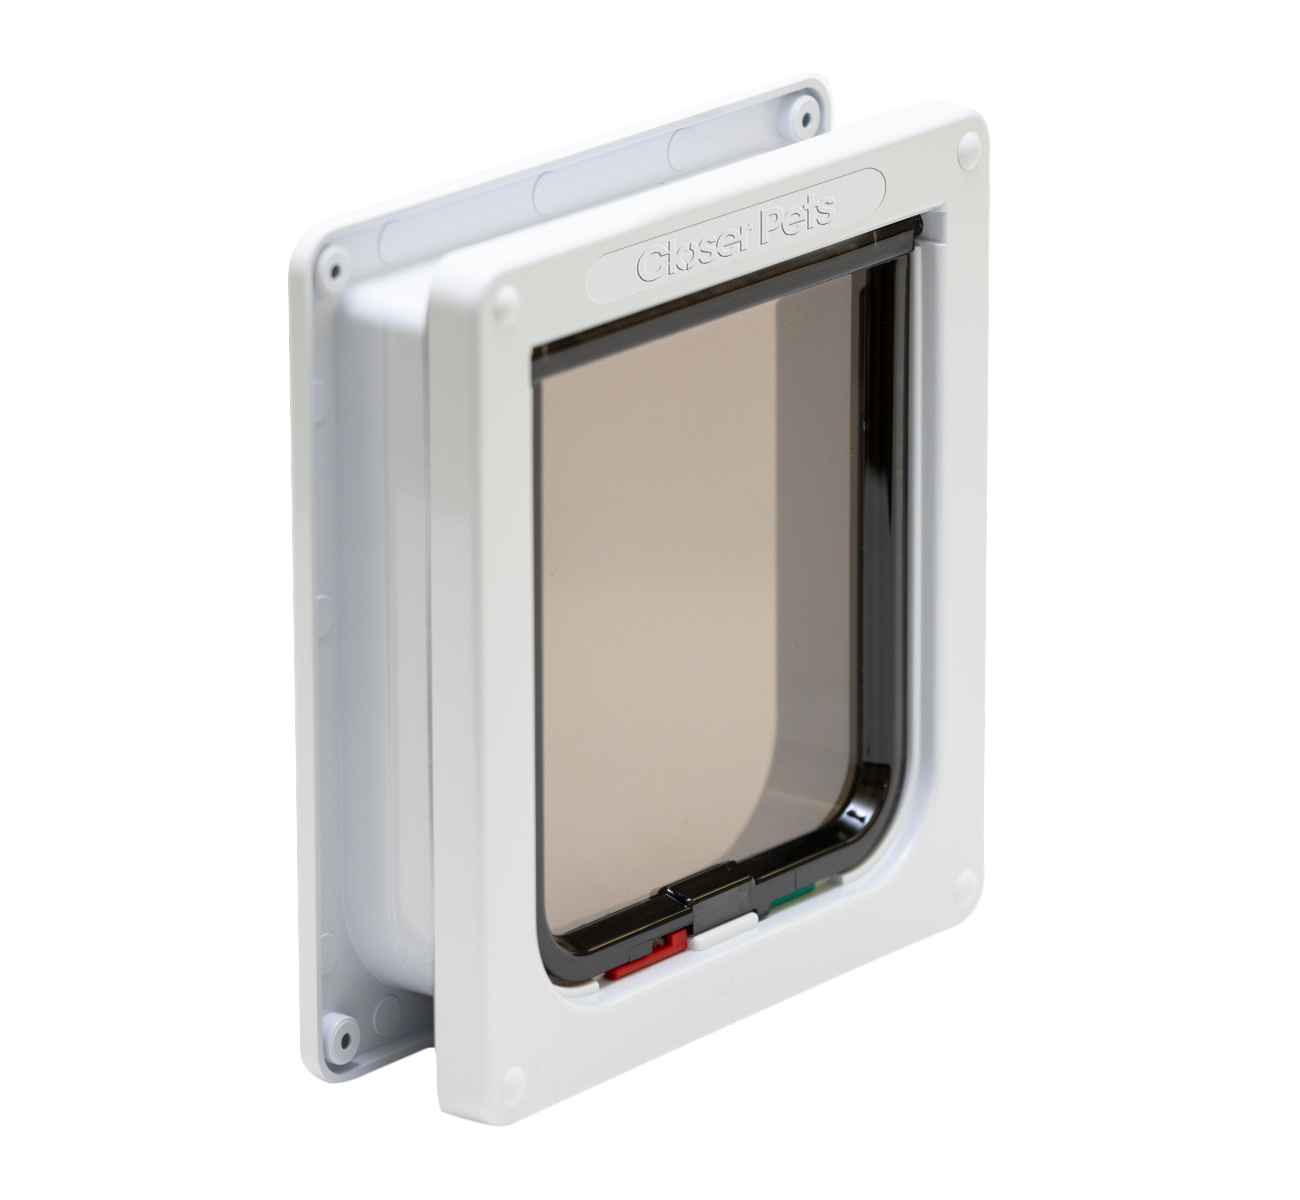 4-Way-Locking Cat Flap with Door Liner to 50mm (2 inches) – White (CP235W)